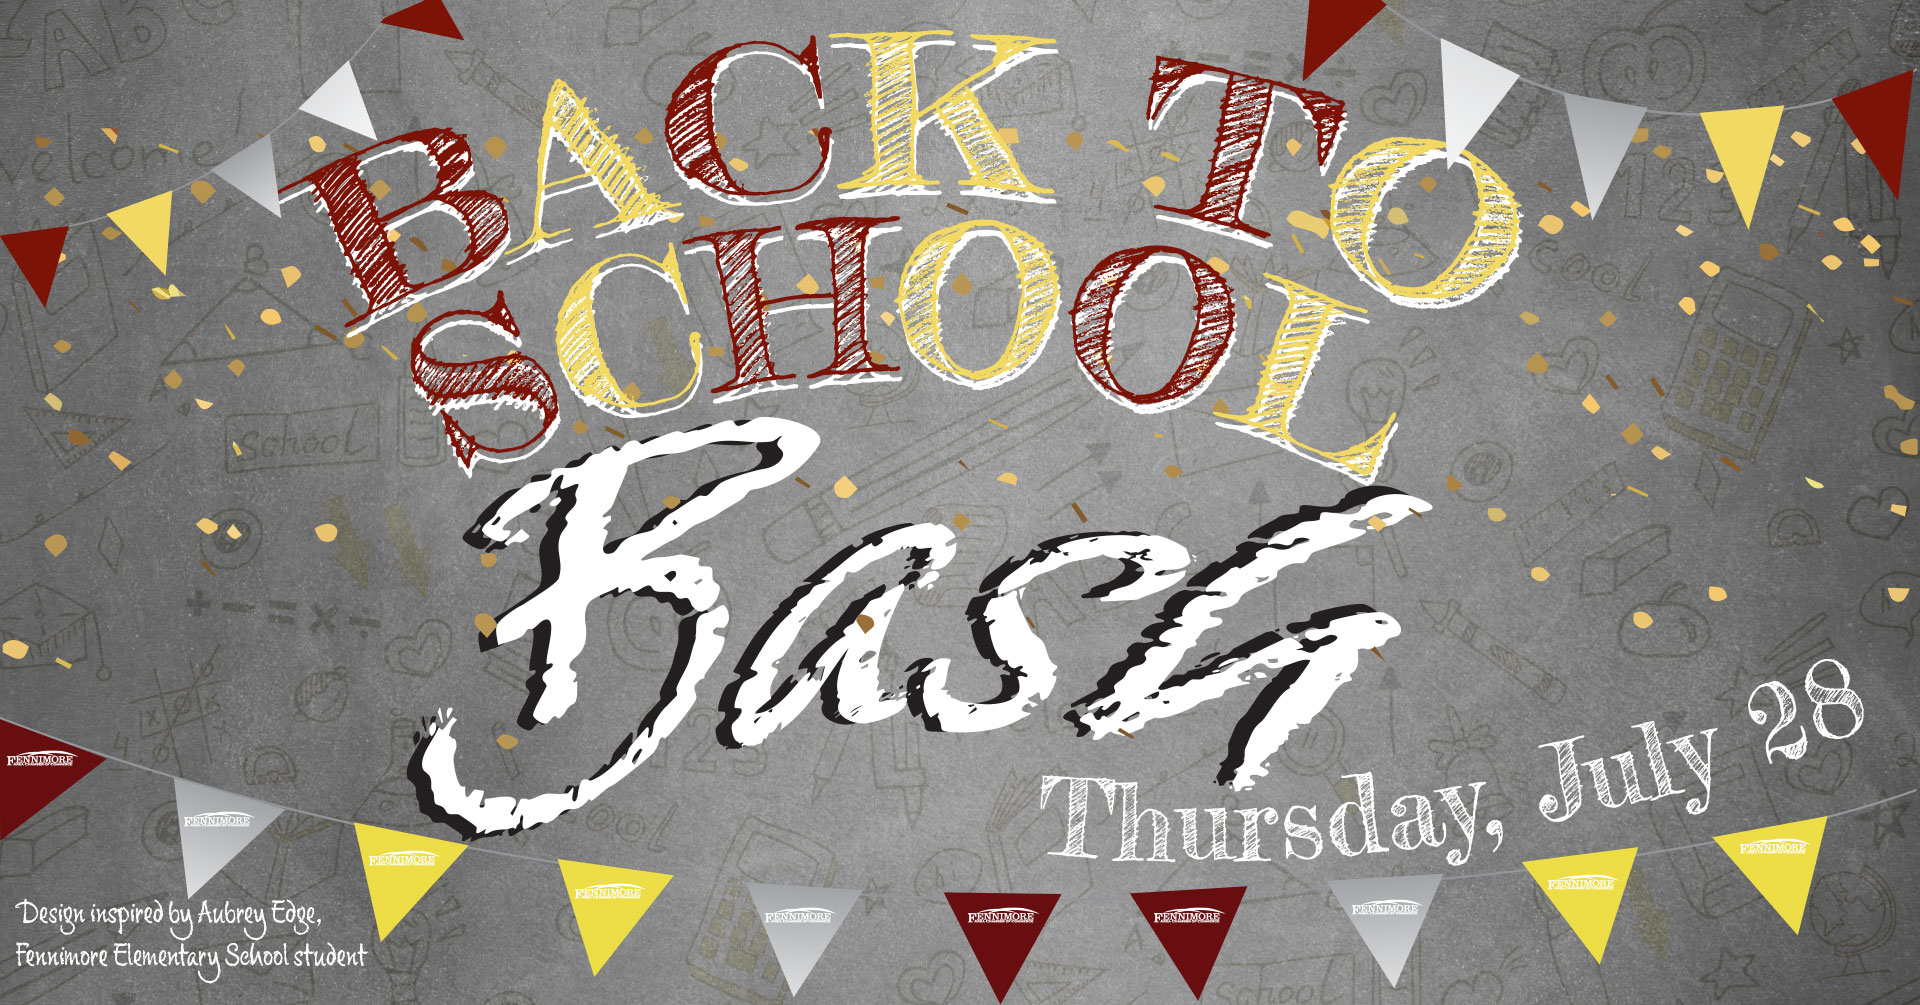 Back-to-School-Bash-in-Fennimore-Wisconsin-sponsored-by-the-Fennimore-Area-Chamber-of-Commerce